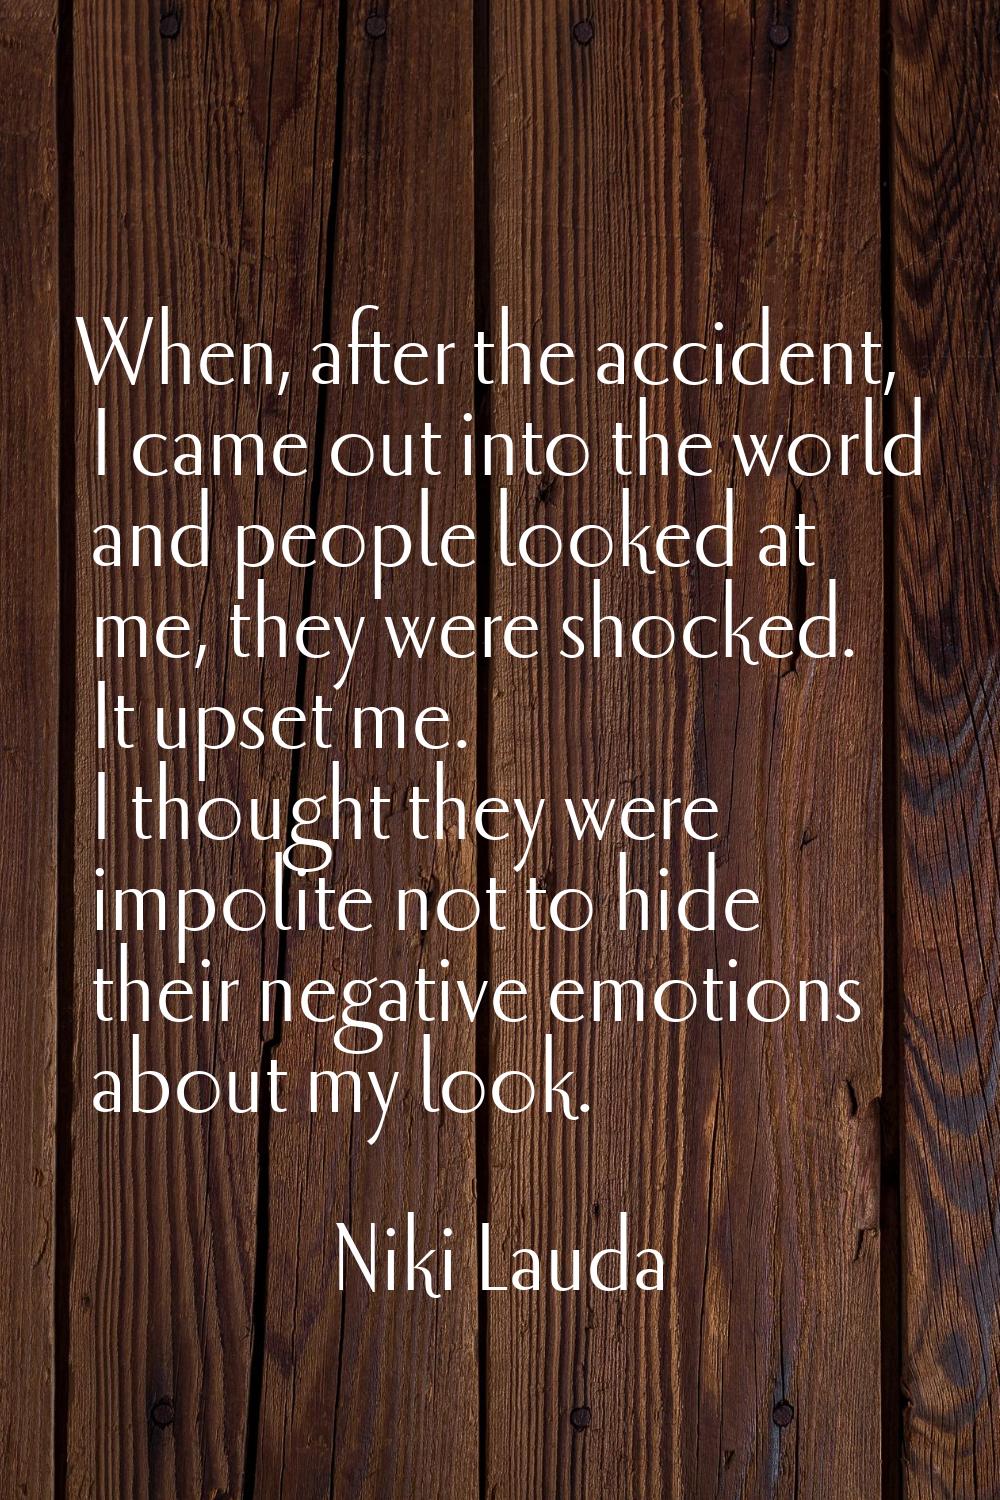 When, after the accident, I came out into the world and people looked at me, they were shocked. It 